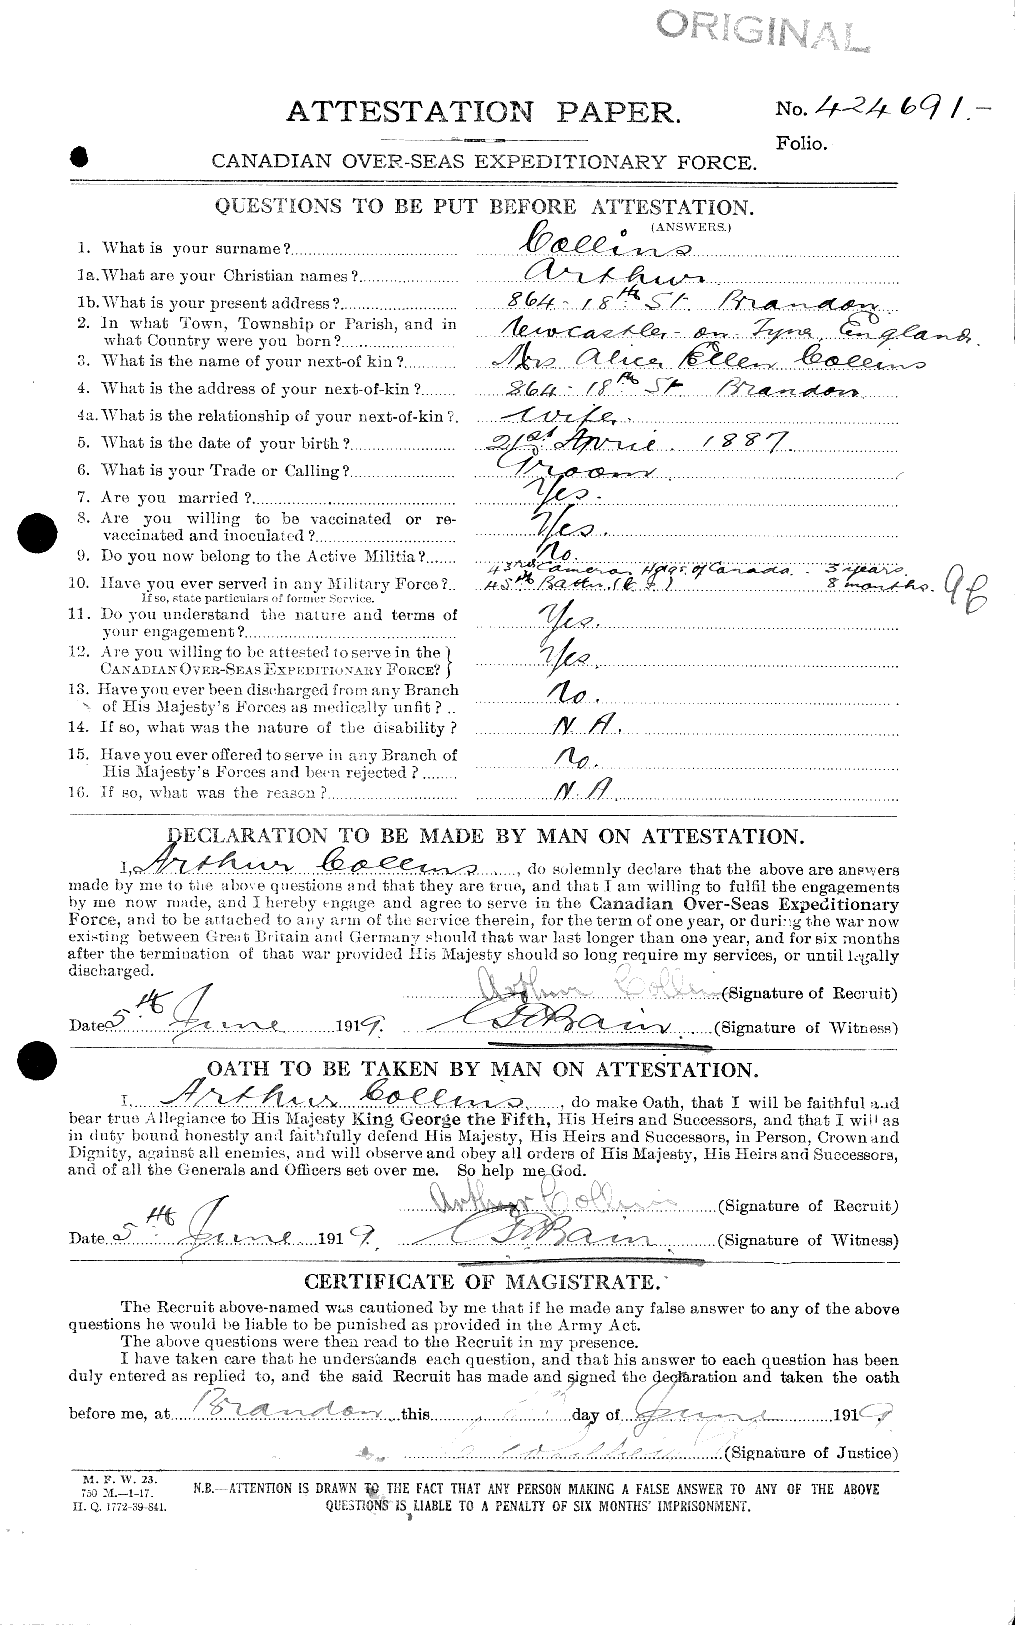 Personnel Records of the First World War - CEF 028980c